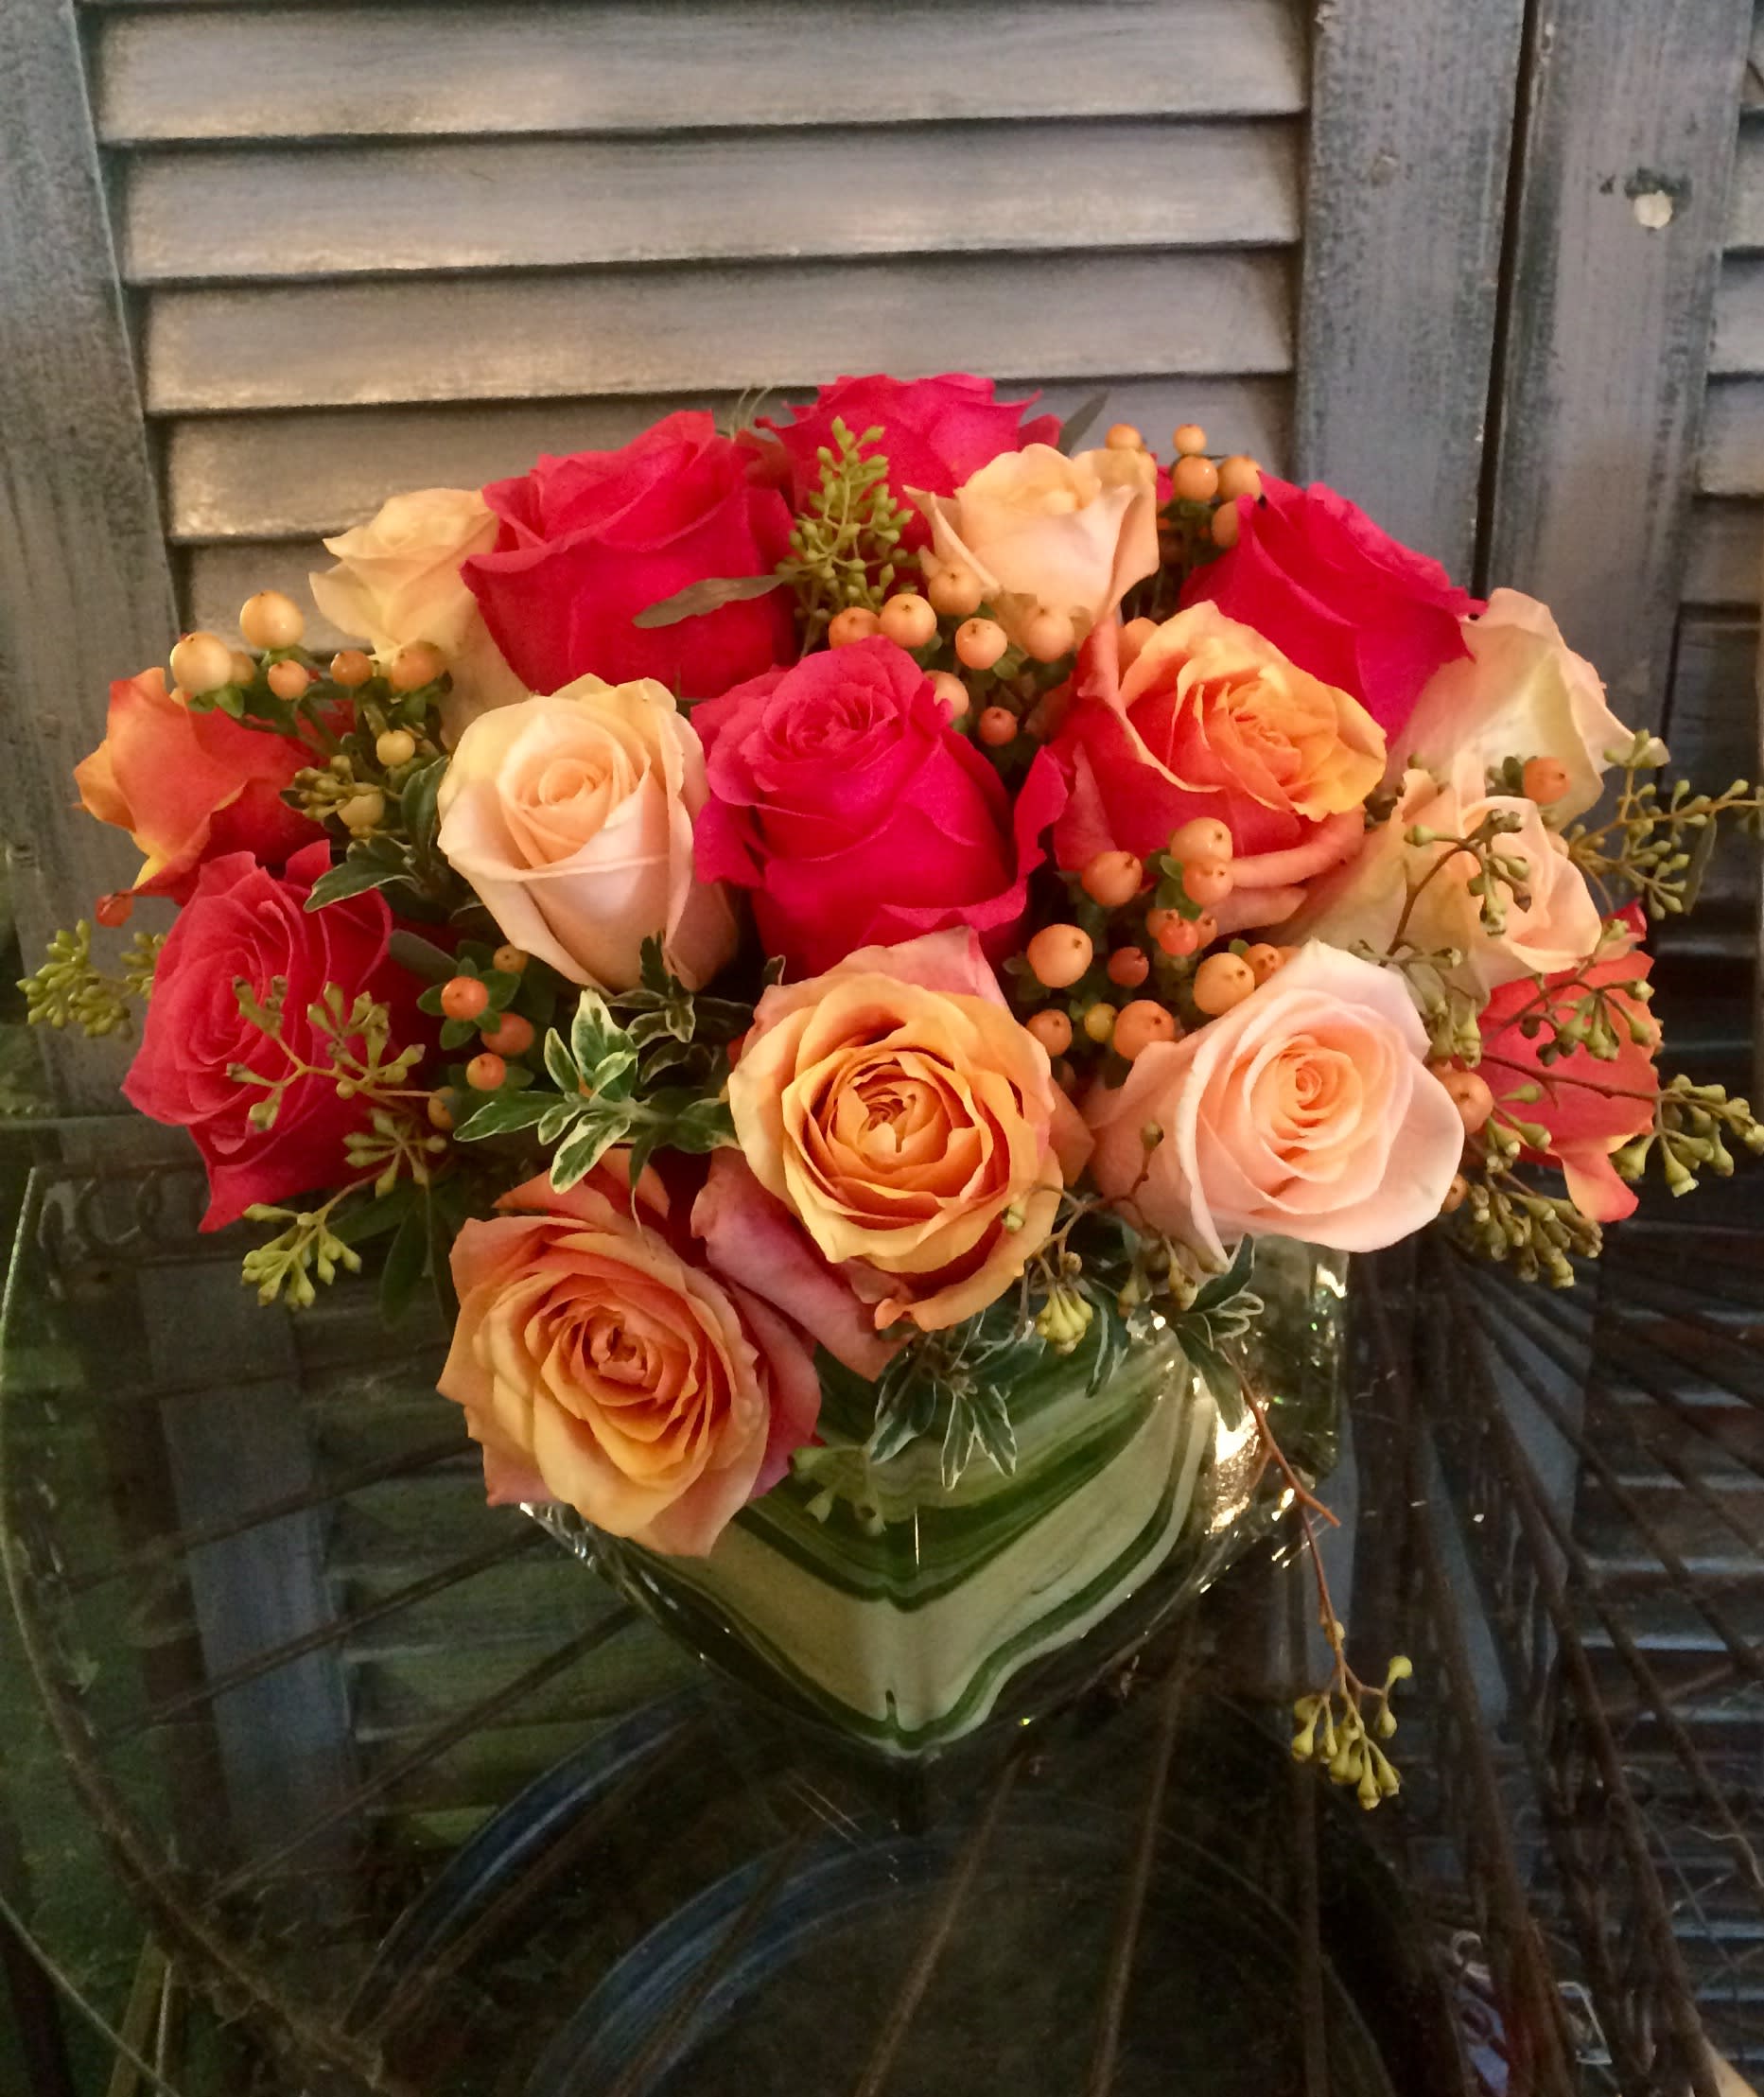 21 Mixed roses in 6&quot; cube - Stunning mix of Cherry Brandy, Tiffany and Cherry O roses accented with peach hypericum and premium greens in 6&quot; leaf lined cube.